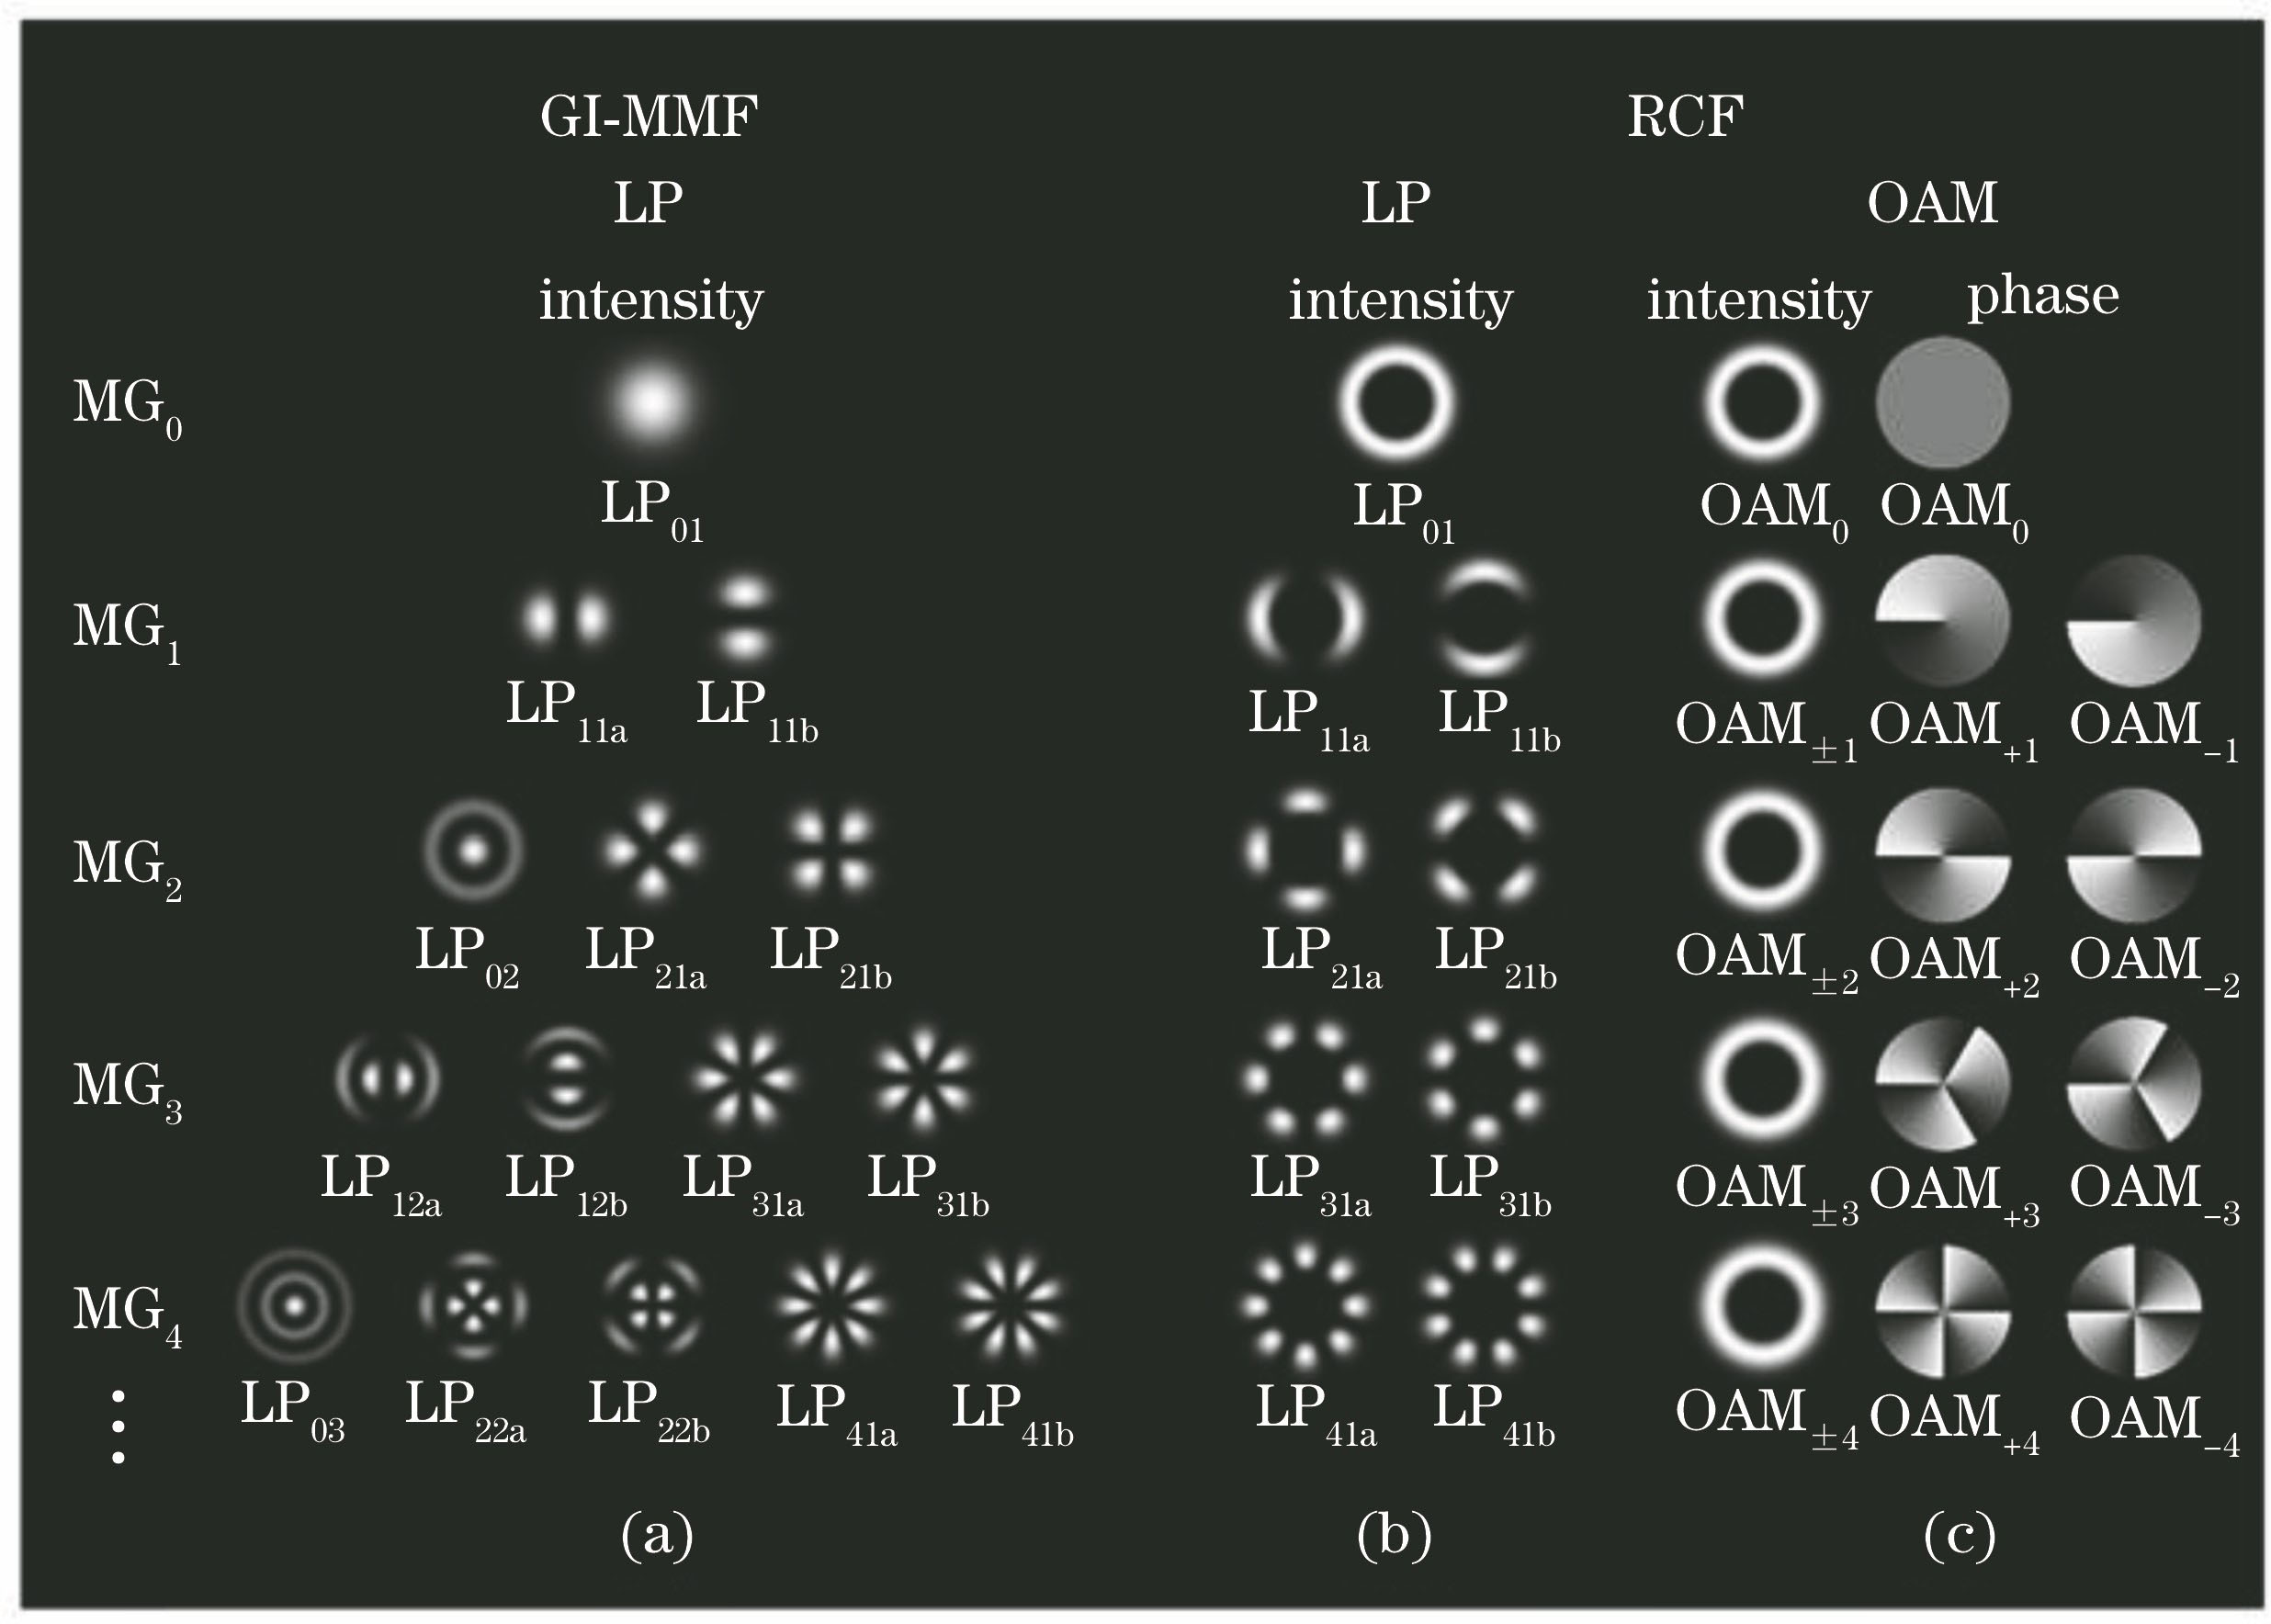 Schematics of modes in each MG for gradient-type refractive index multimode fiber and radial first-order ring-core fiber. (a) Intensity of LP modes in each MG for GI-MMF; (b) intensity of LP modes in each MG for RCF; (c) intensity and phase of OAM modes in each MG for RCF[18]